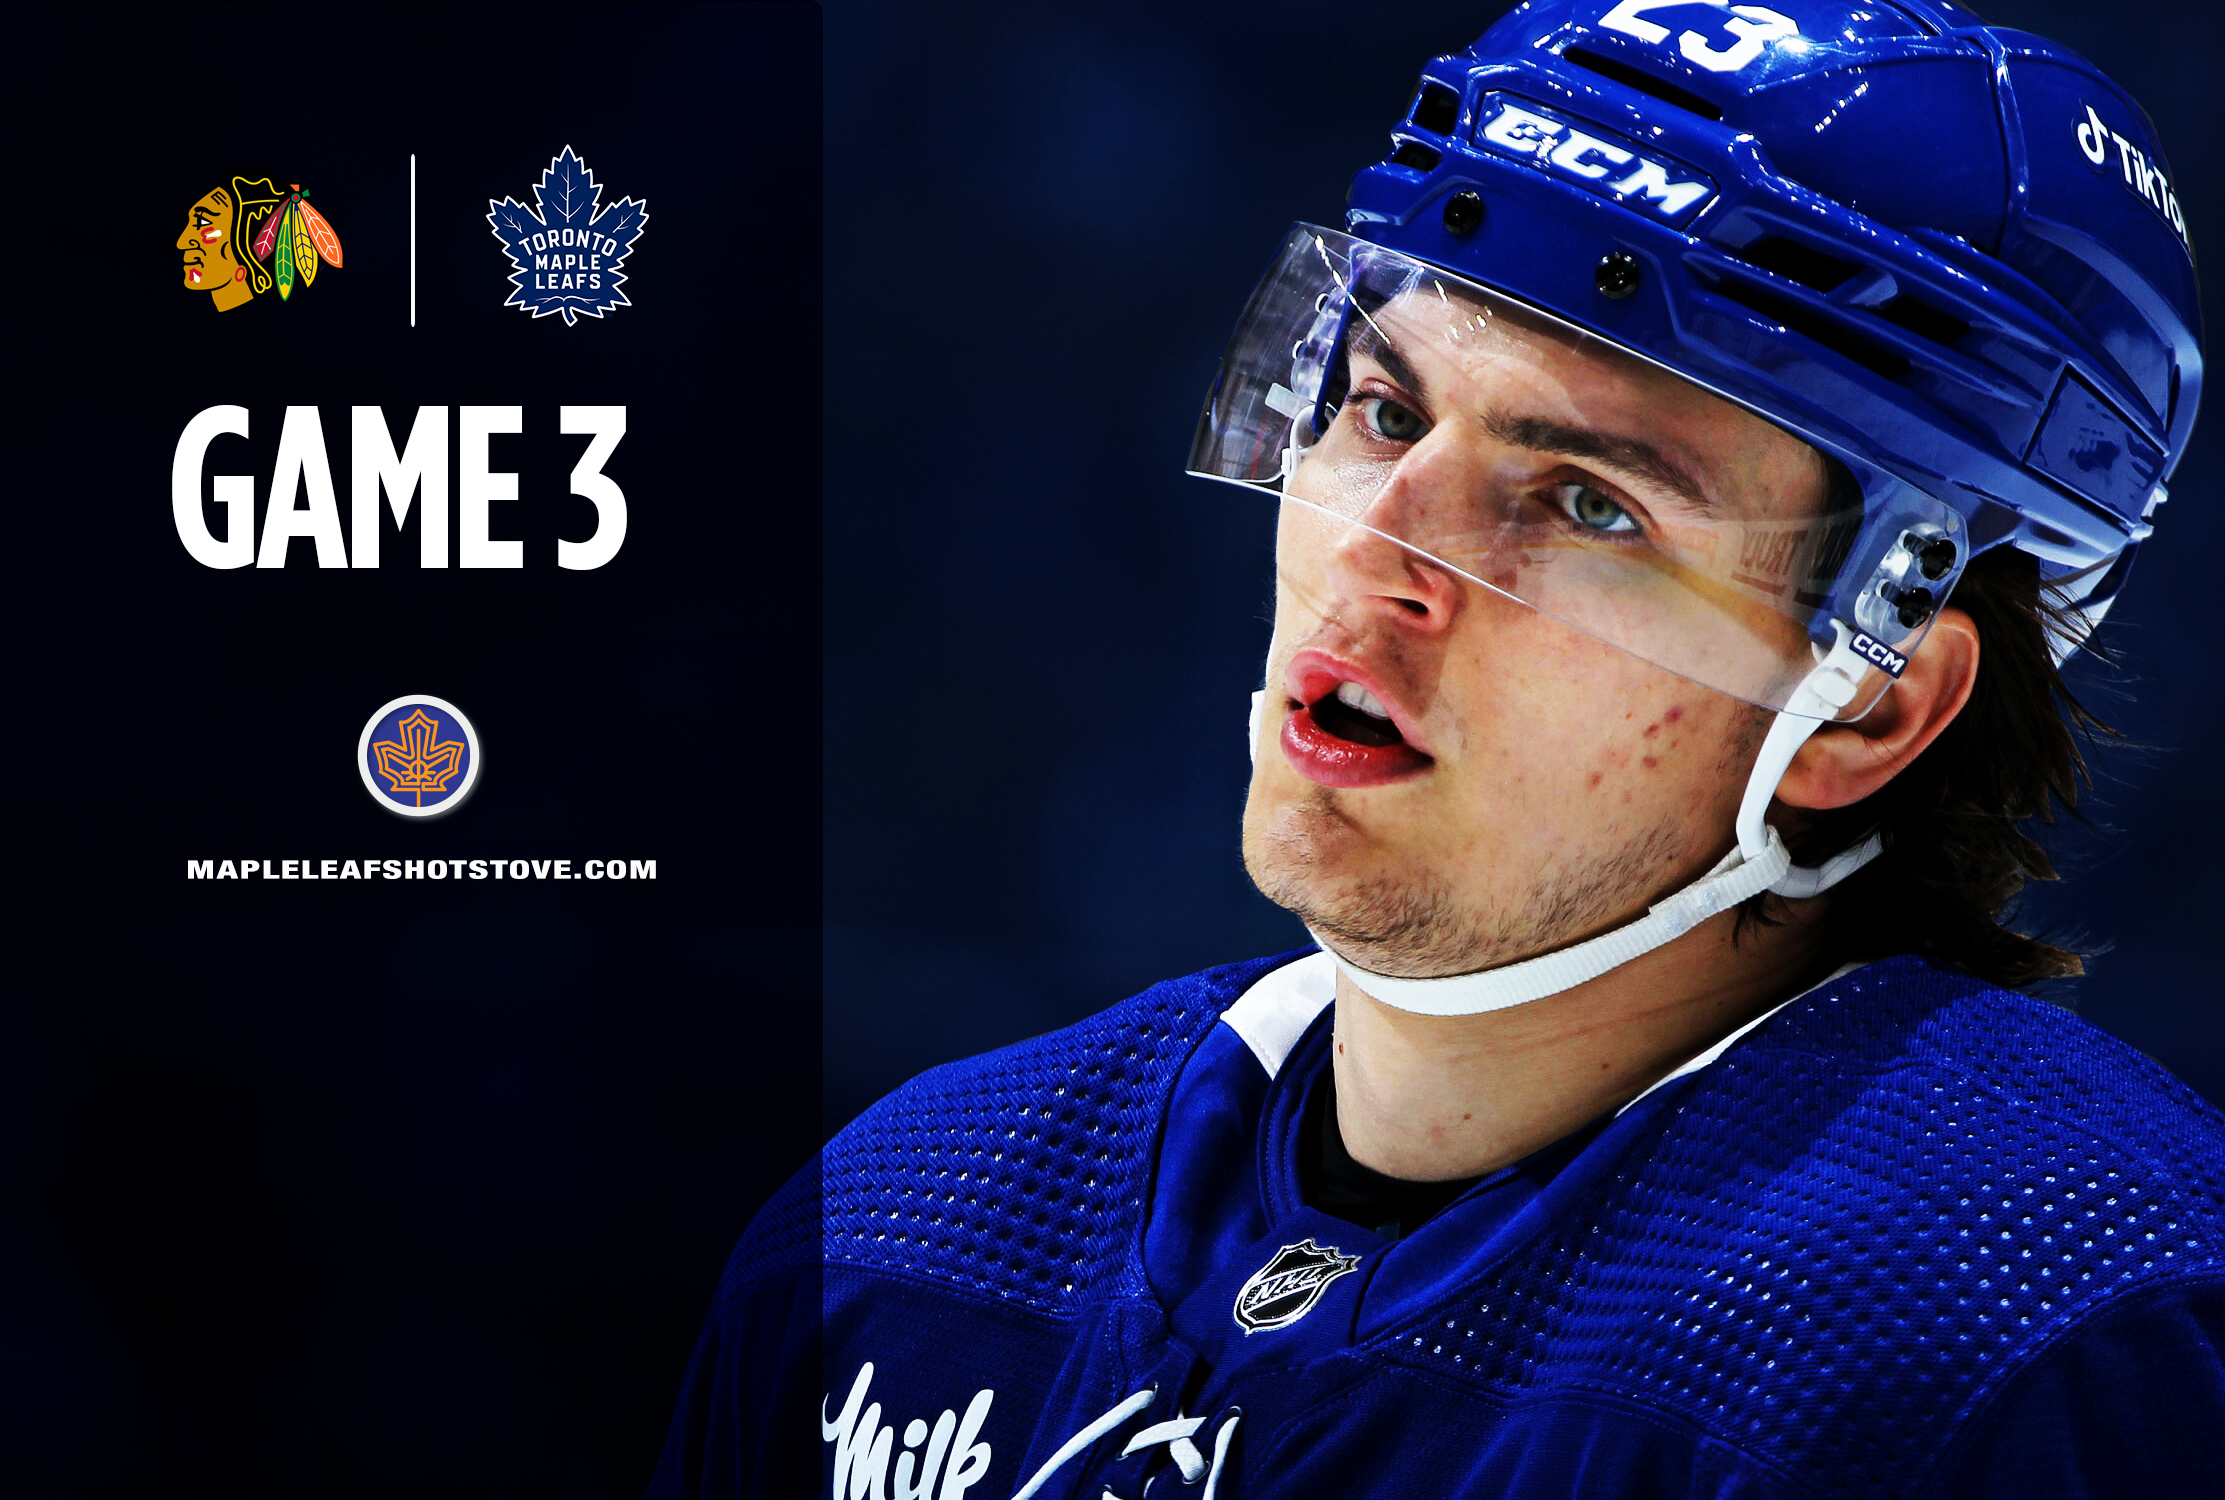 Watch All or Nothing: Toronto Maple Leafs - Season 1